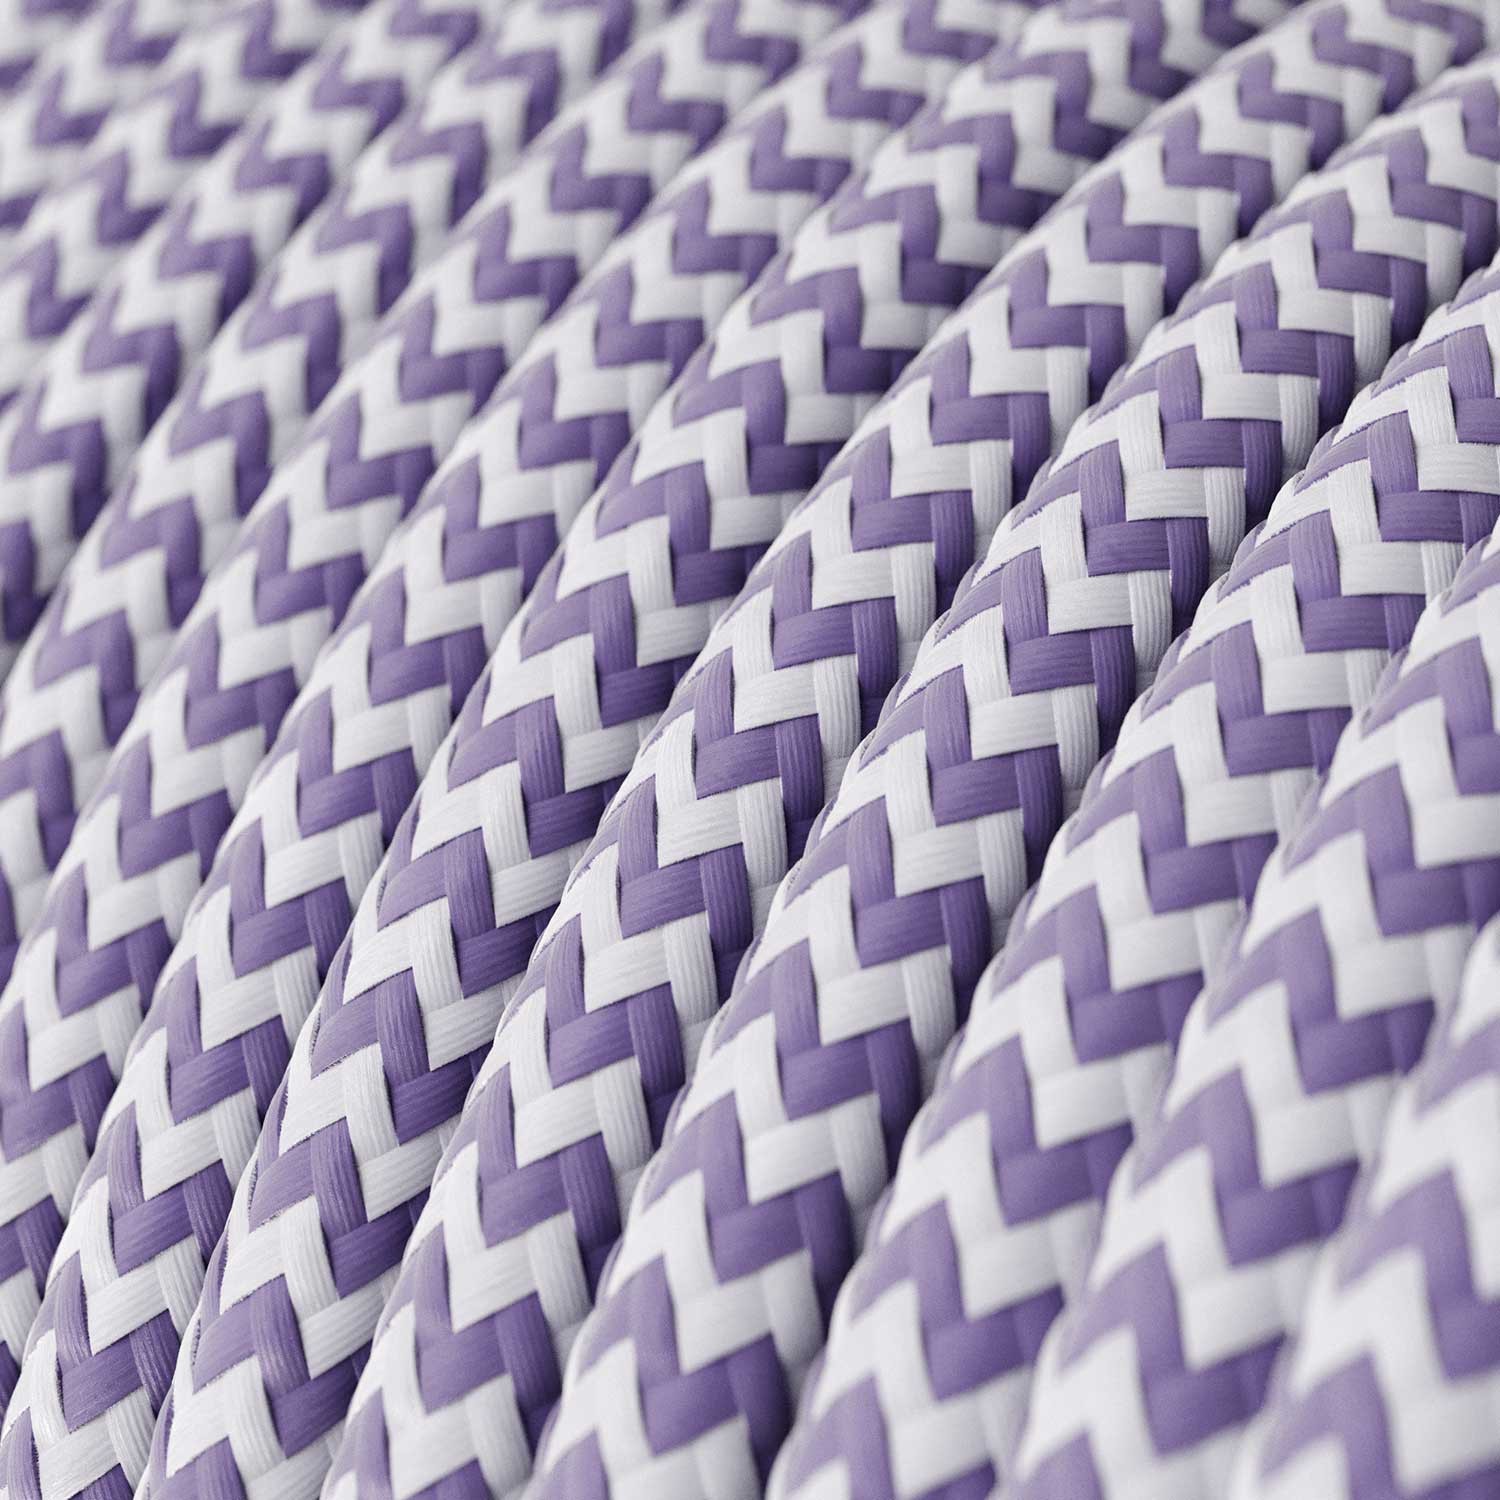 Round Electric Cable covered by Rayon fabric ZigZag RZ07 Lilac